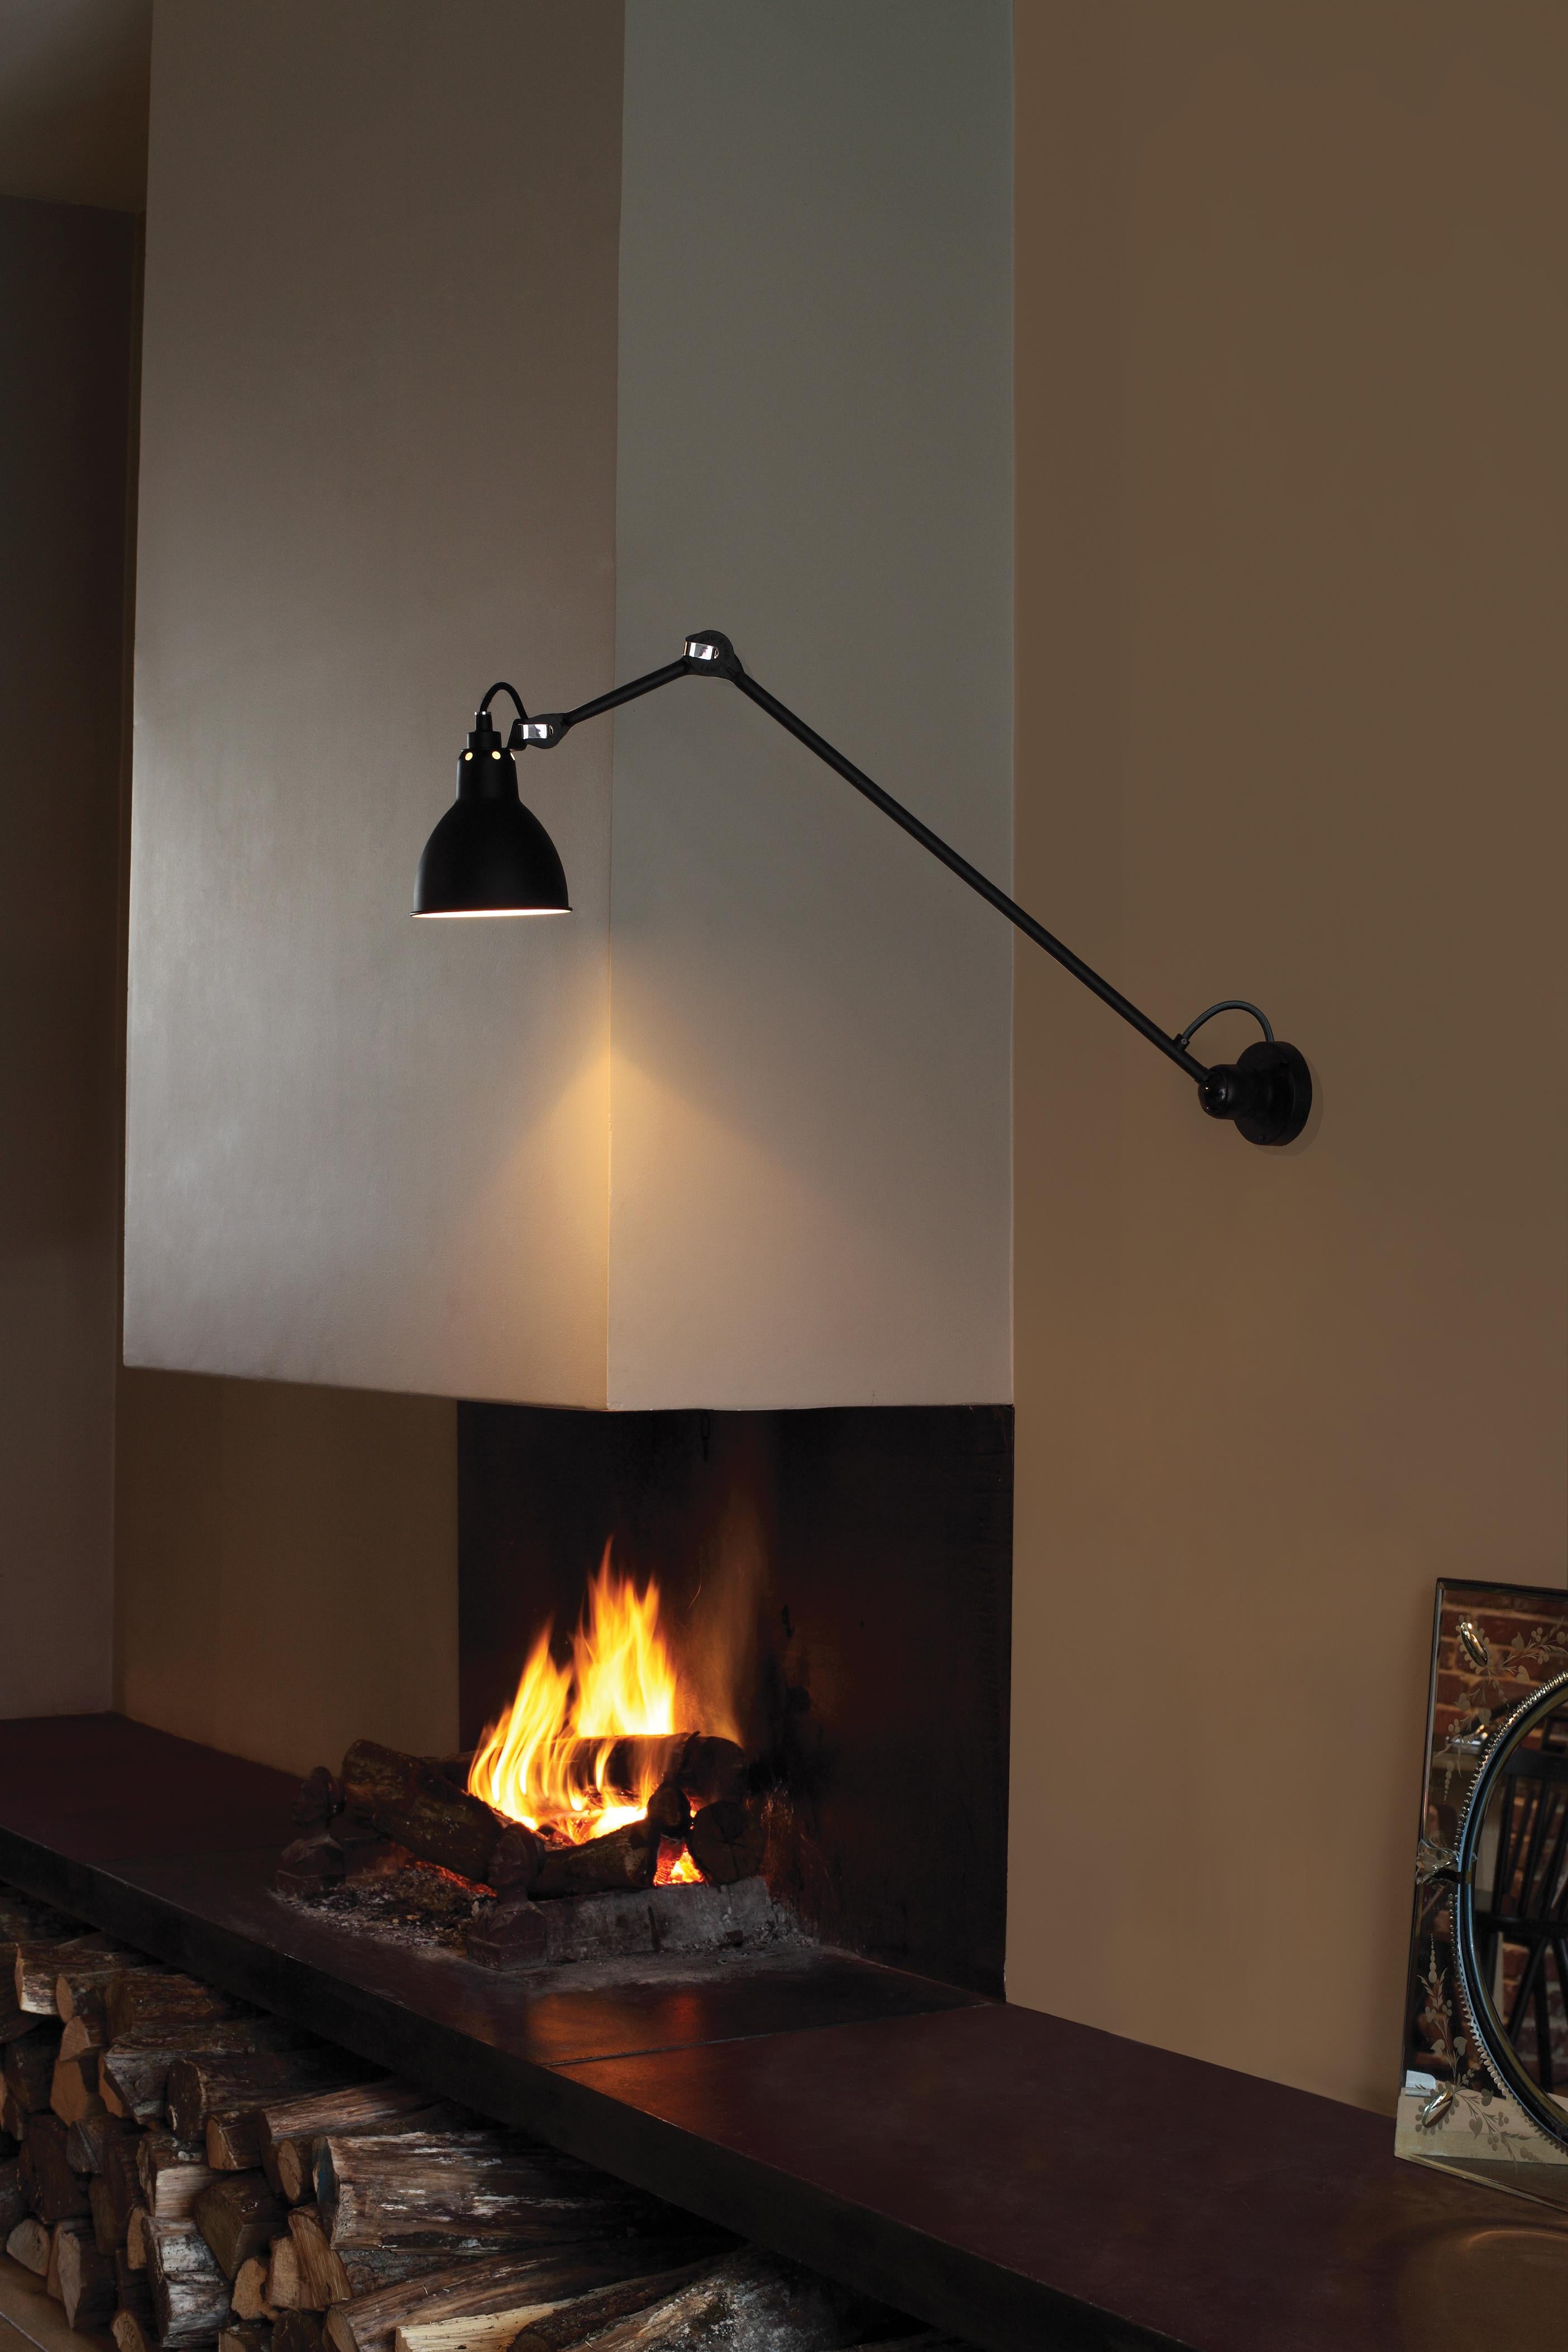 DCW Editions La Lampe Gras N°304 L60 Wall Lamp in Black Steel Arm and Black Shade by Bernard-Albin Gras
 
 In 1921 Bernard-Albin GRAS designed a series of lamps for use in offices and in industrial environments. The GRAS lamp, as it was subsequently